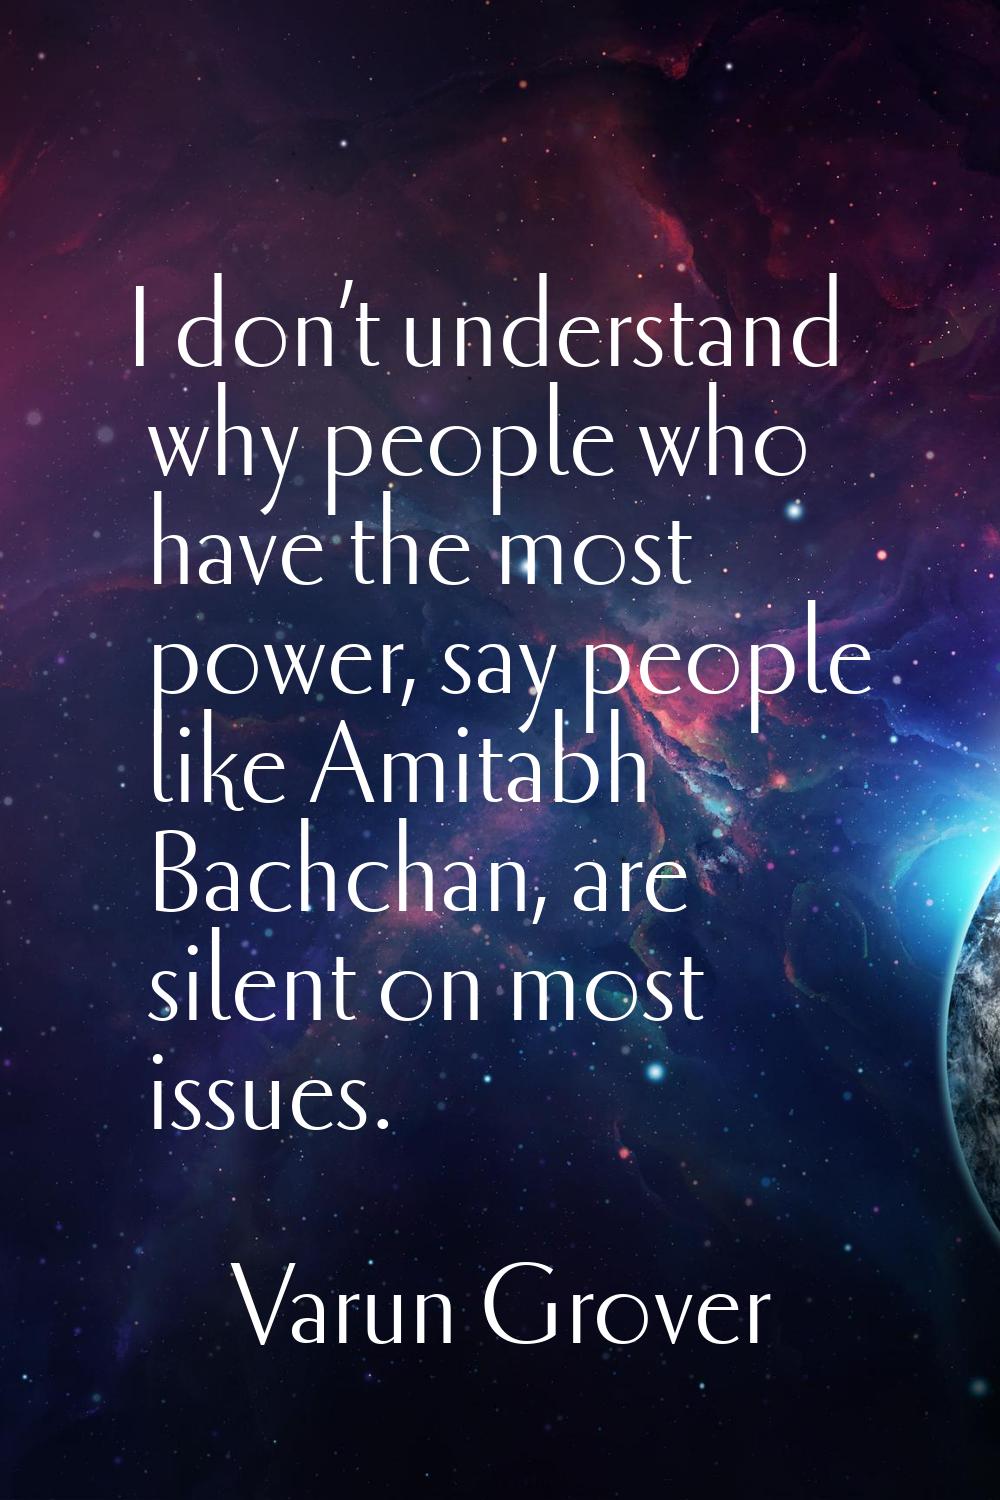 I don’t understand why people who have the most power, say people like Amitabh Bachchan, are silent